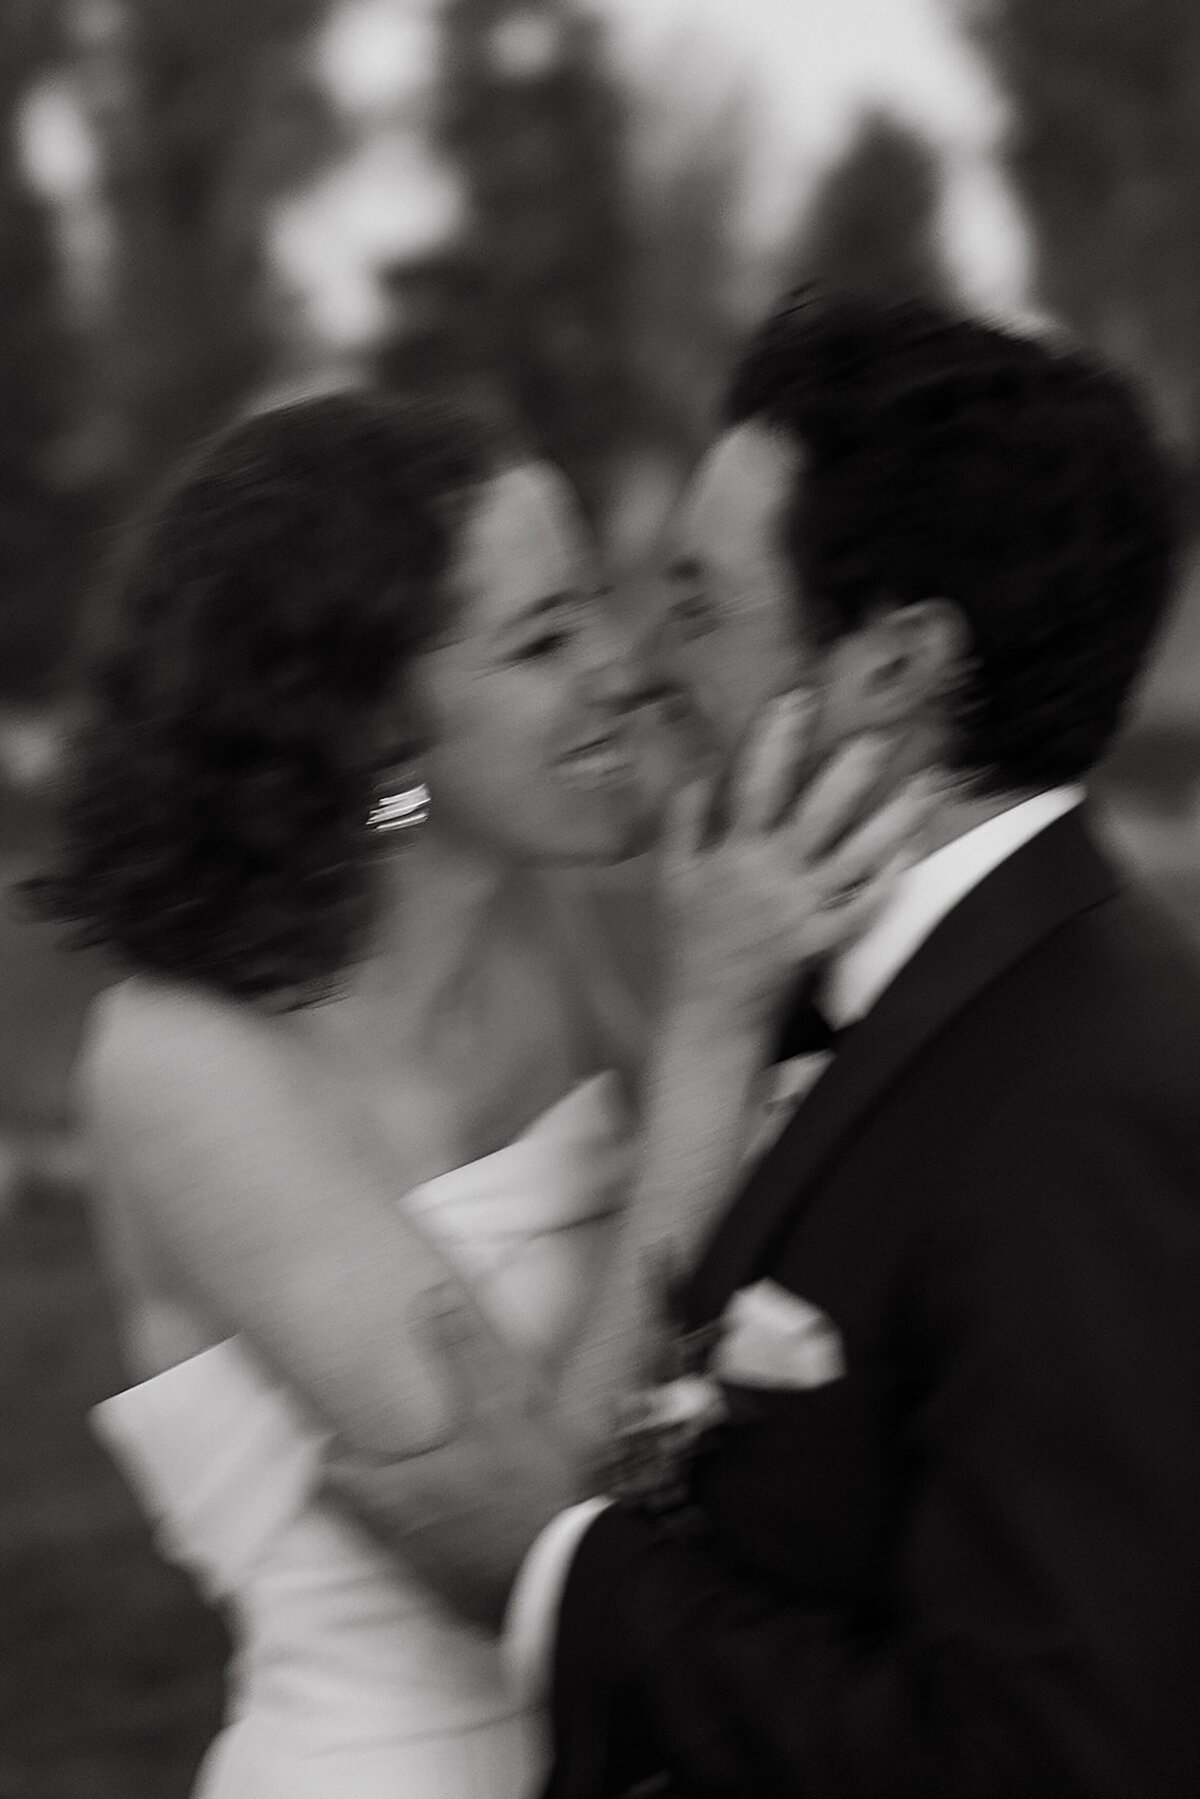 Black and white photo of a bride and groom smiling and holding each other's face, the photo is blurry with movement